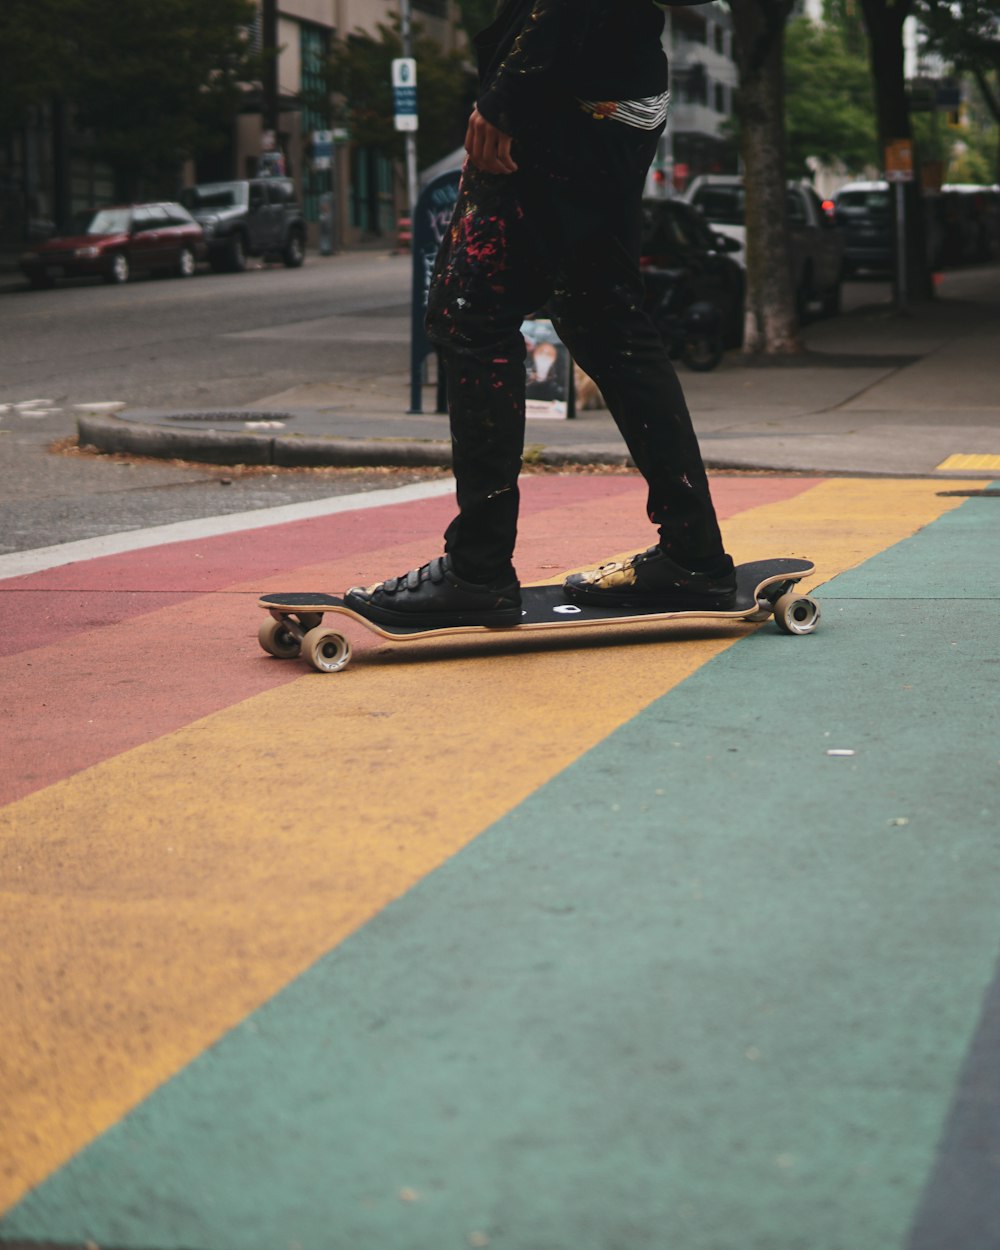 man in black pants and black shoes riding on skateboard during daytime